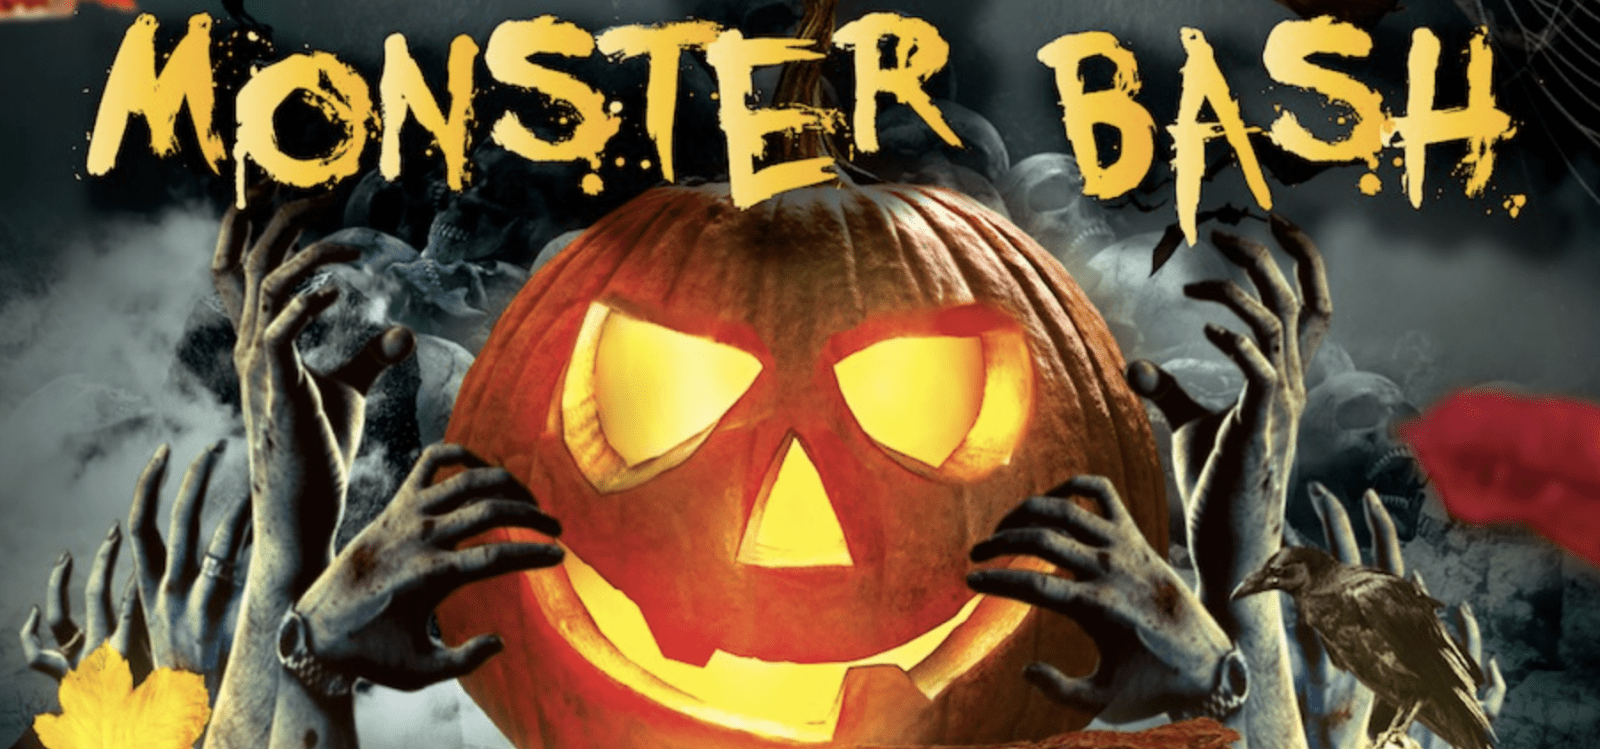 Monster Bash – $500 To The Best Costume